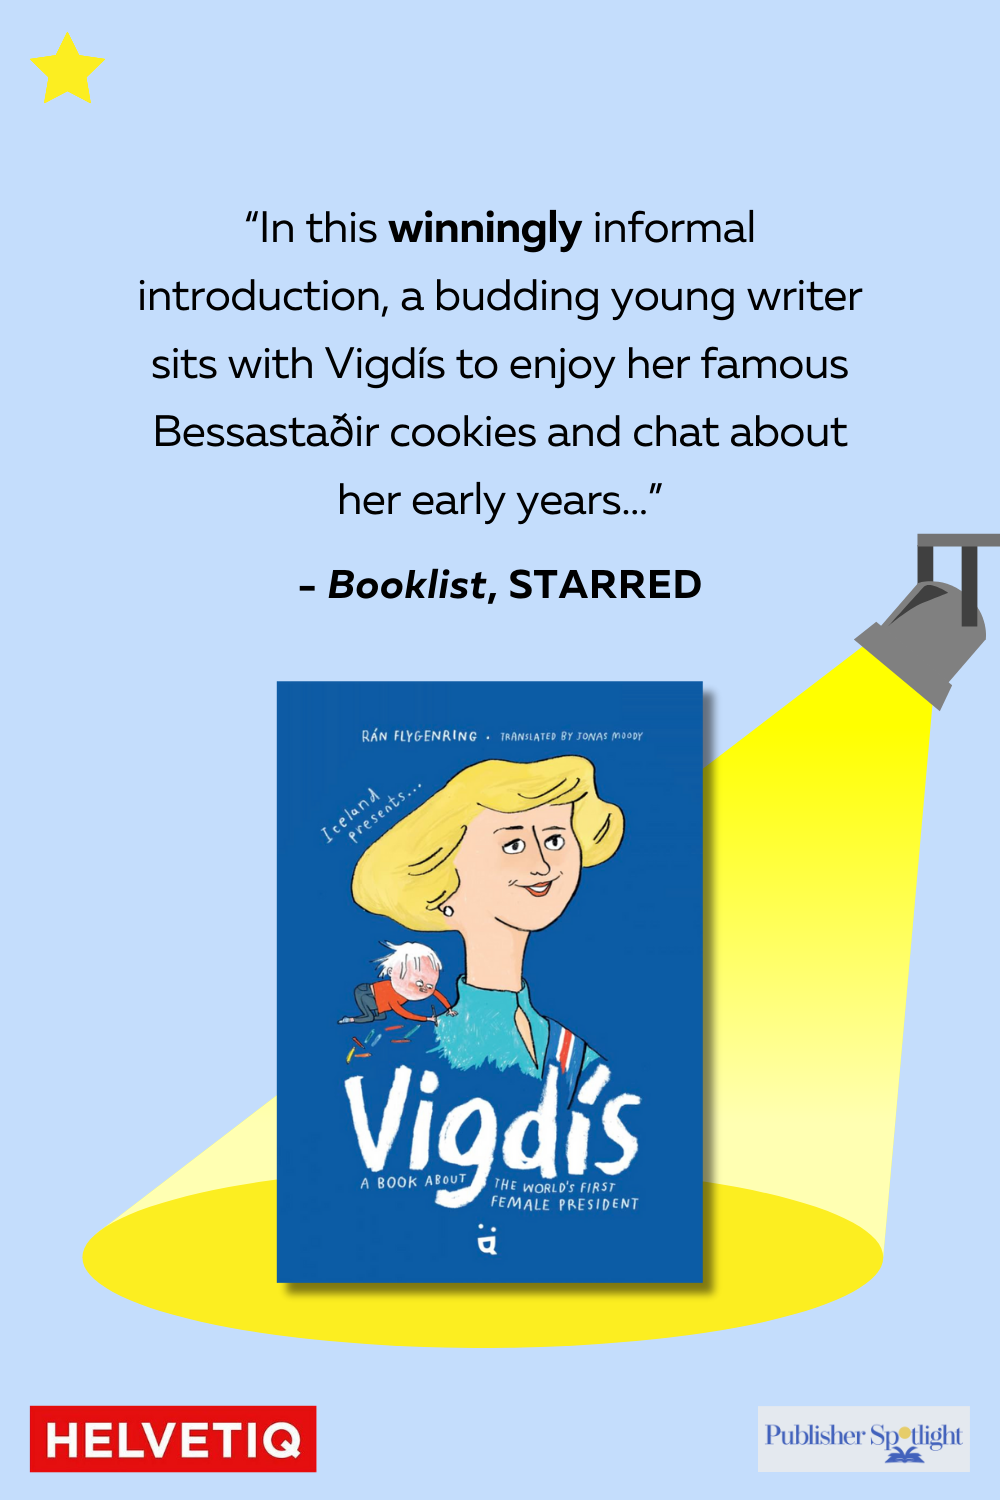 Vertical starred review graphic for Vigdis